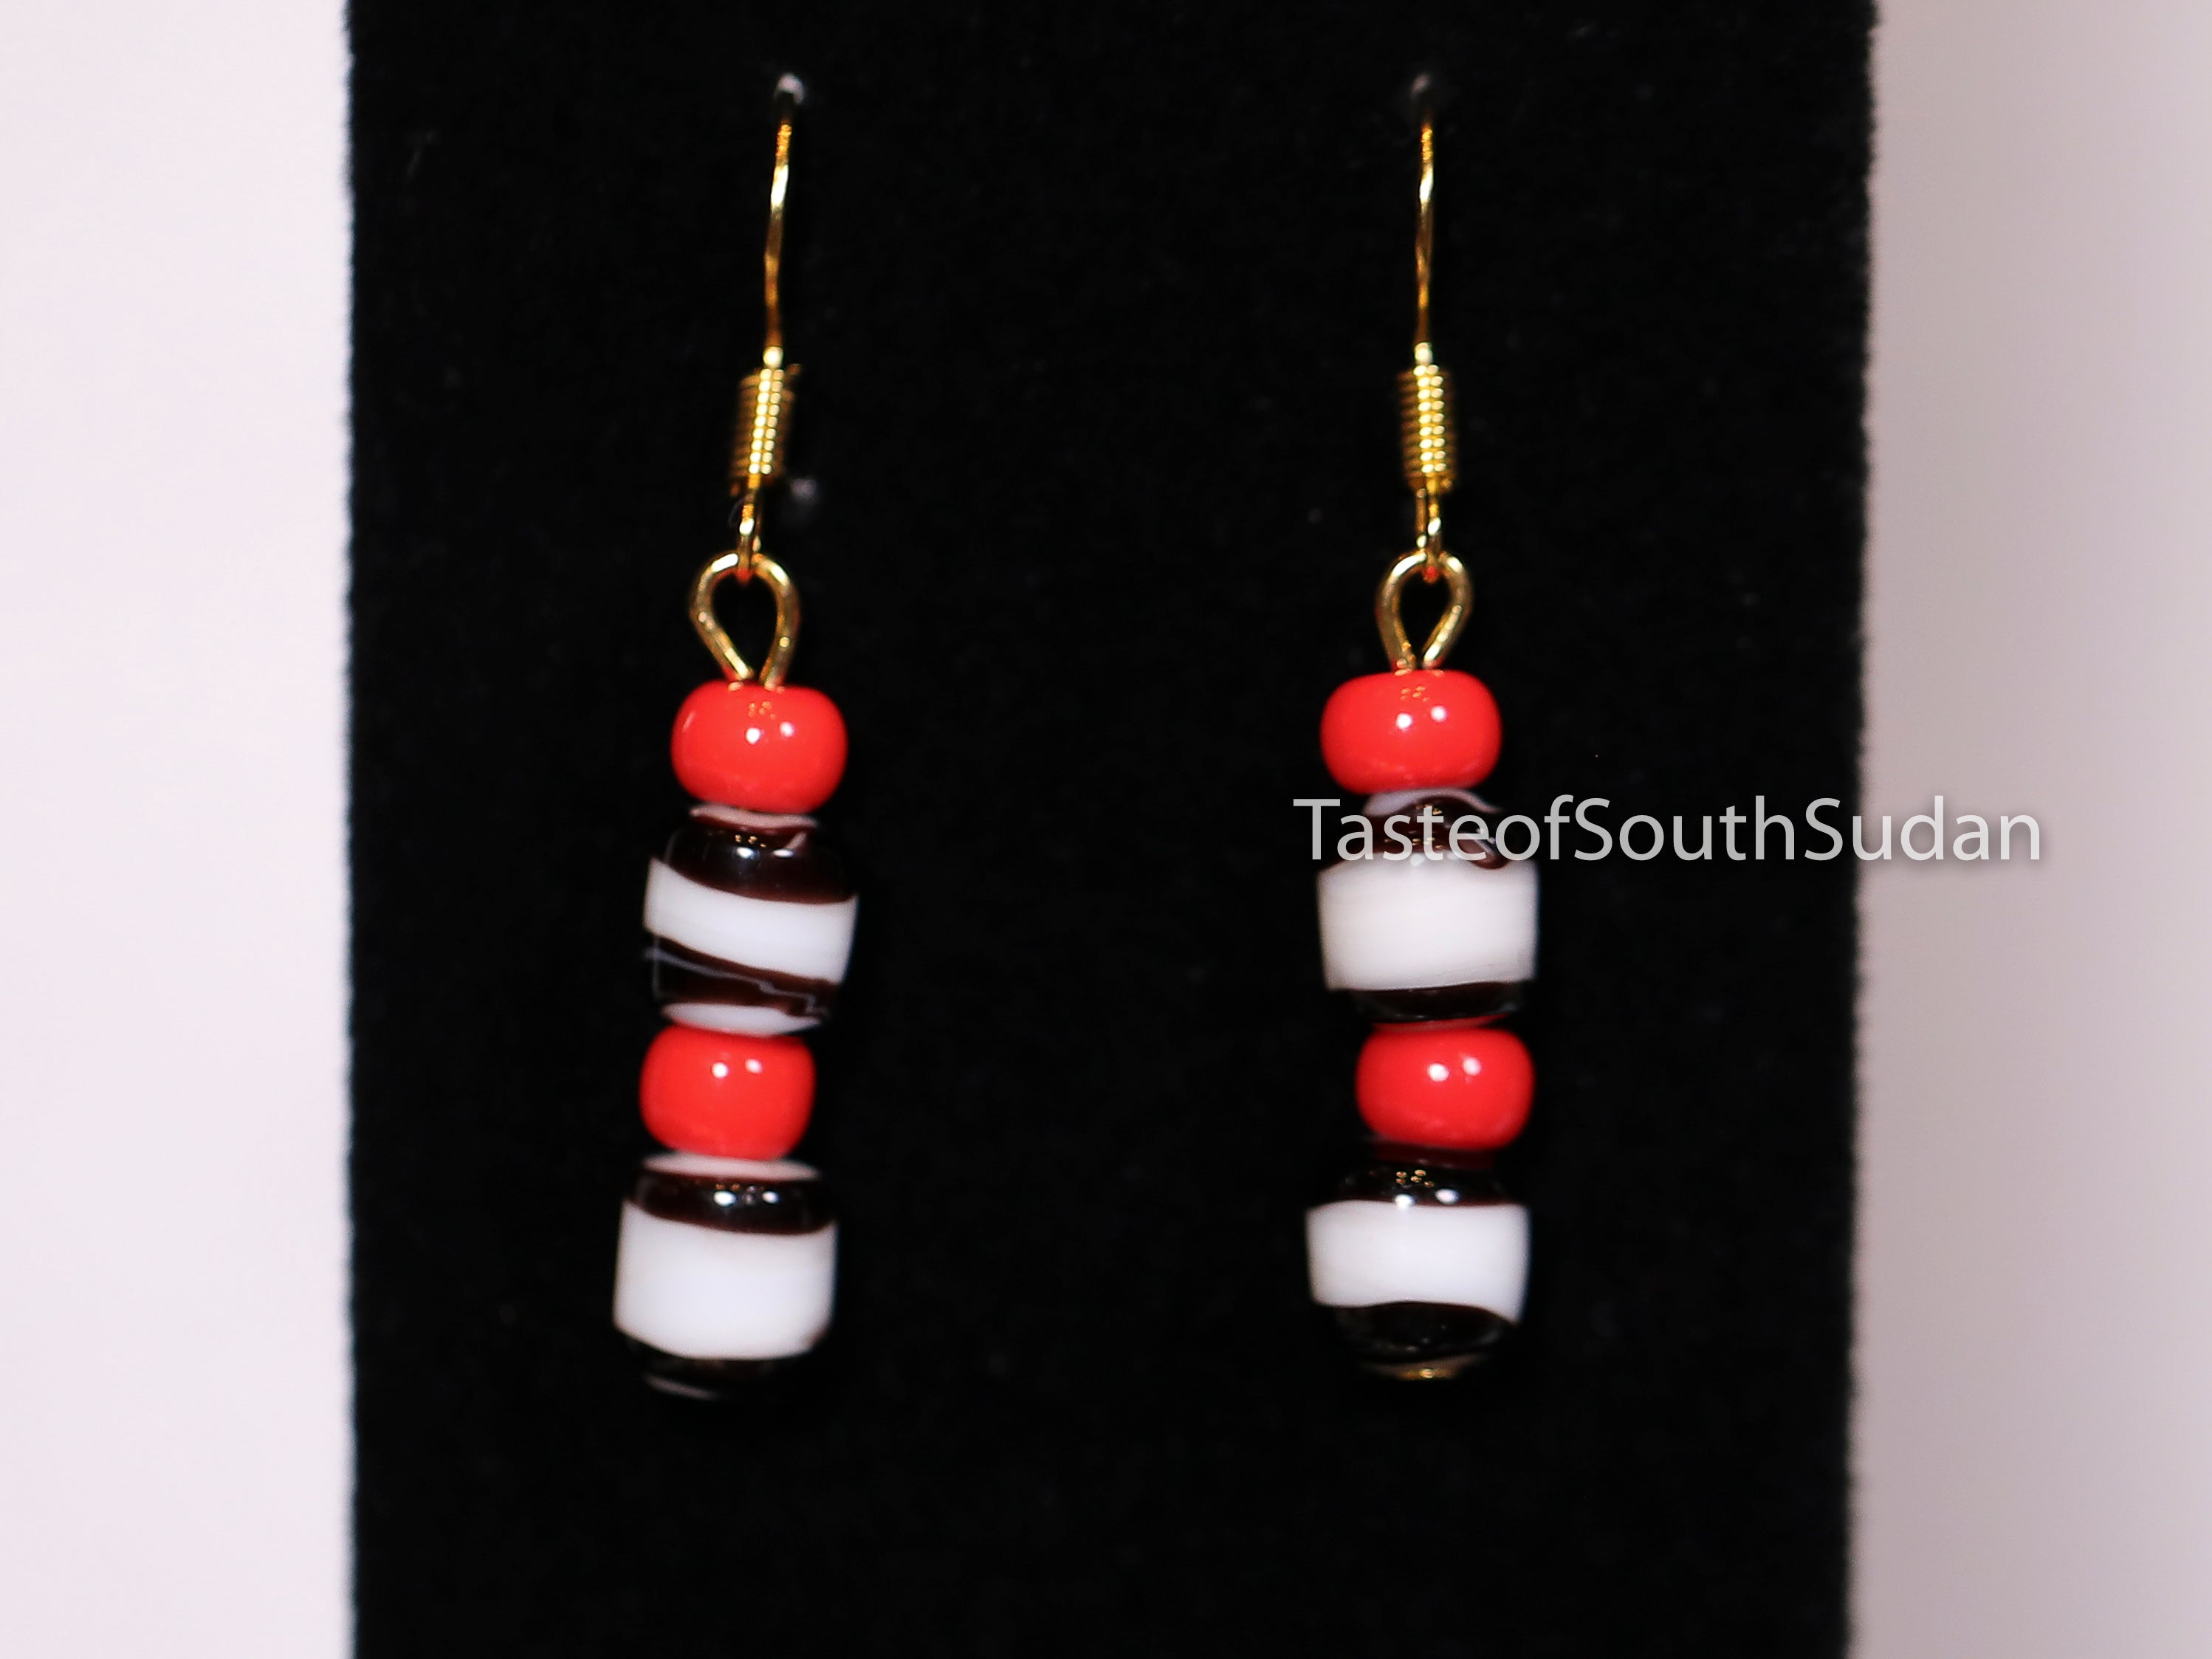 Authentic African Beaded Earrings Red, white and black glass beads.   Hand made by women in South Sudan using traditional beading techniques passed down generations.  Sudanese earrings.